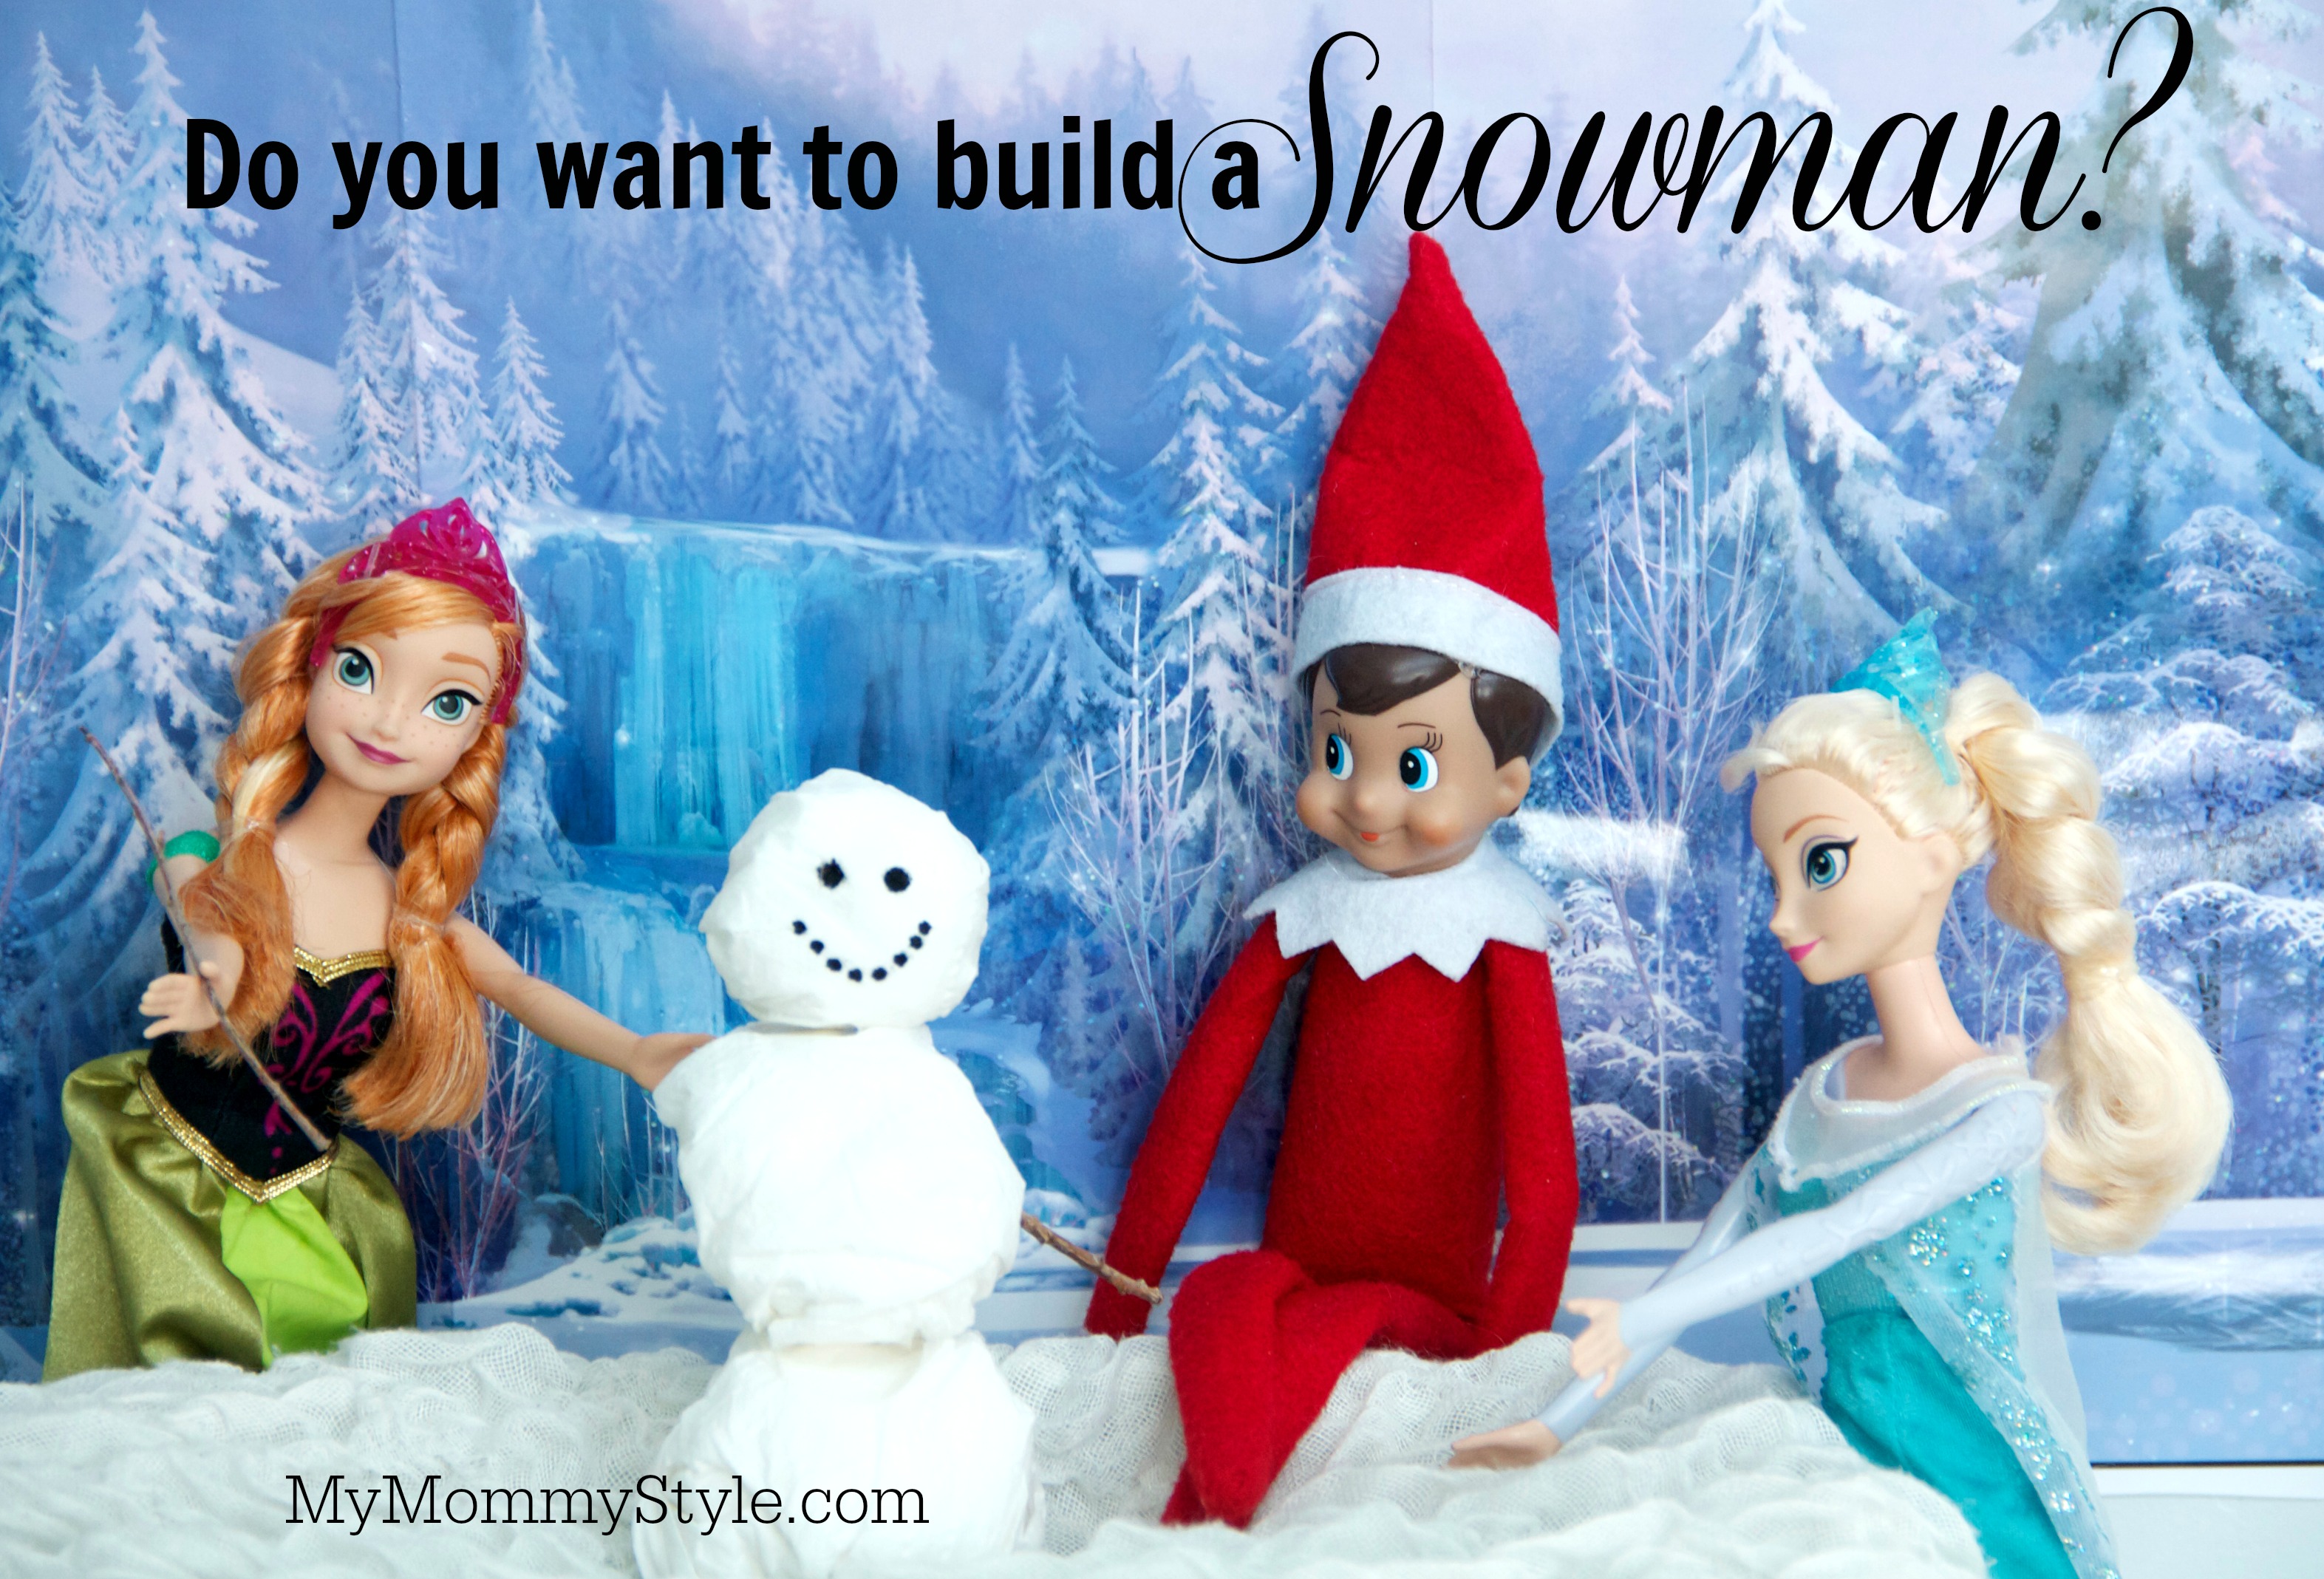 Elf On The Shelf Frozen Do You Want To Build A Snowman My Mommy Style